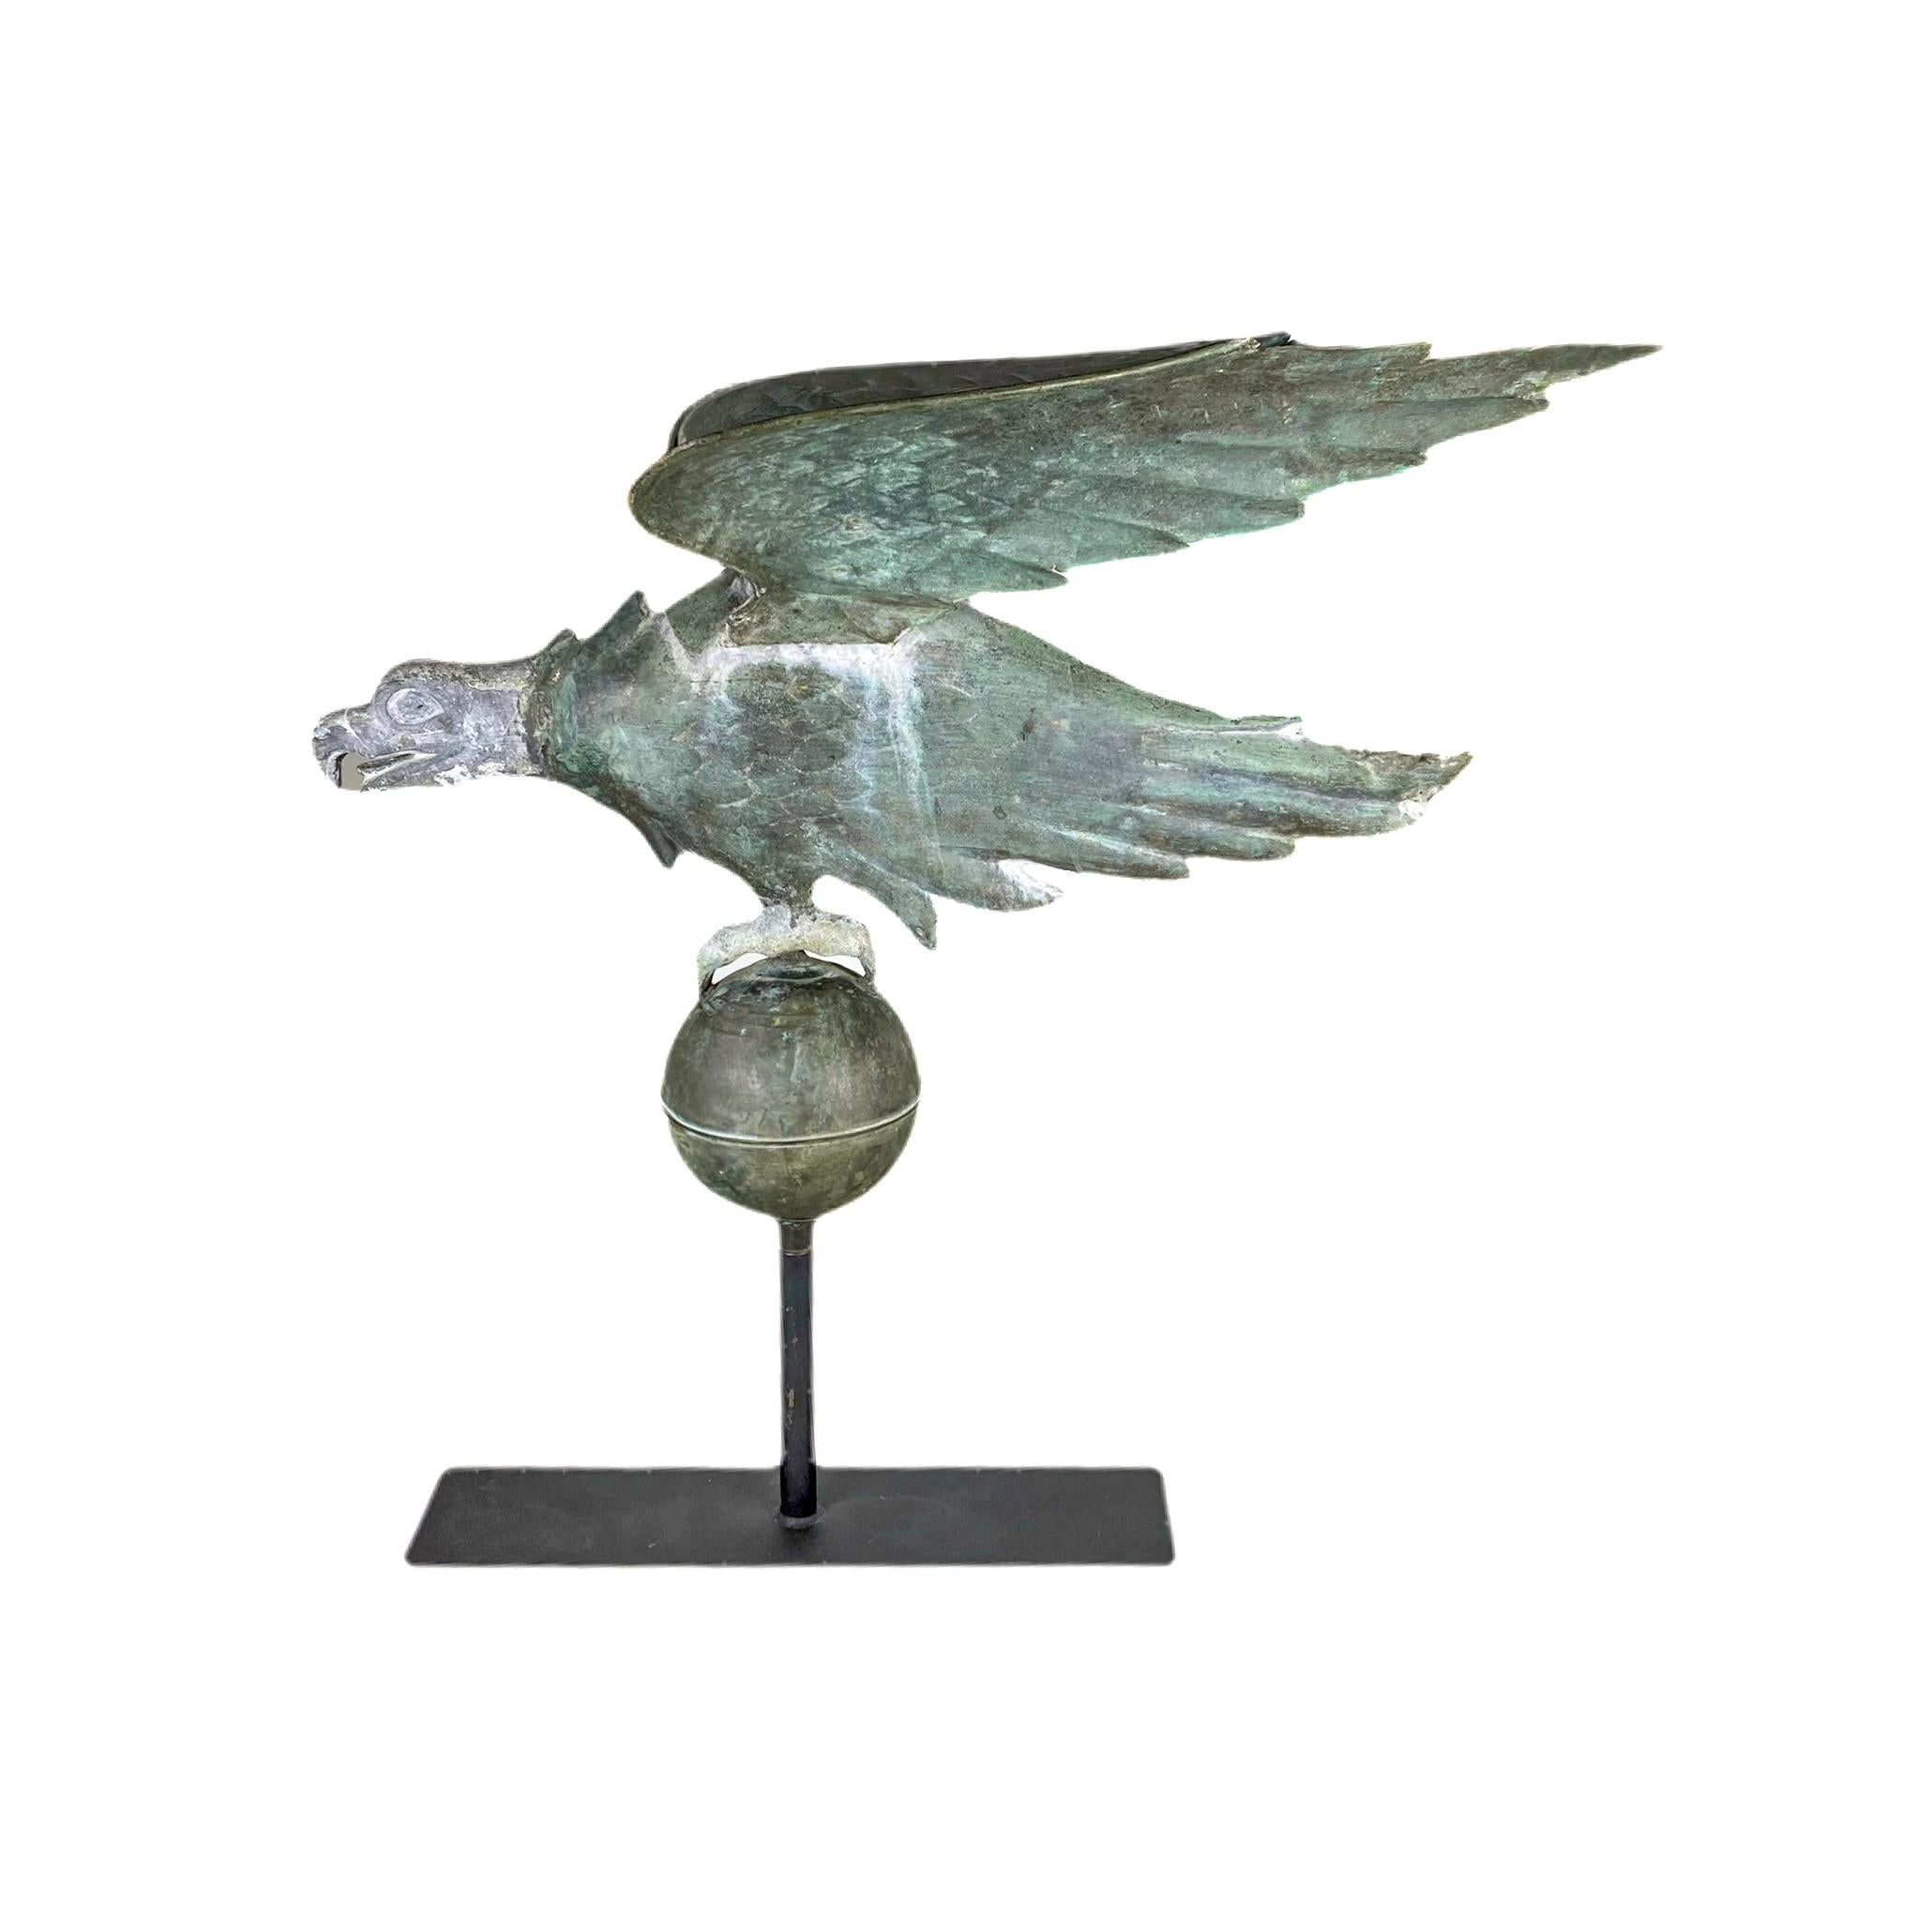 Spread wing eagle in flattened full-body form perched on a ball. Molded copper with cast zinc head and talons. Verdigris weathered surface throughout, mounted on a rectangular iron base.
Attributed to A.L Jewell & Co., Waltham, Ma.
Late 19th